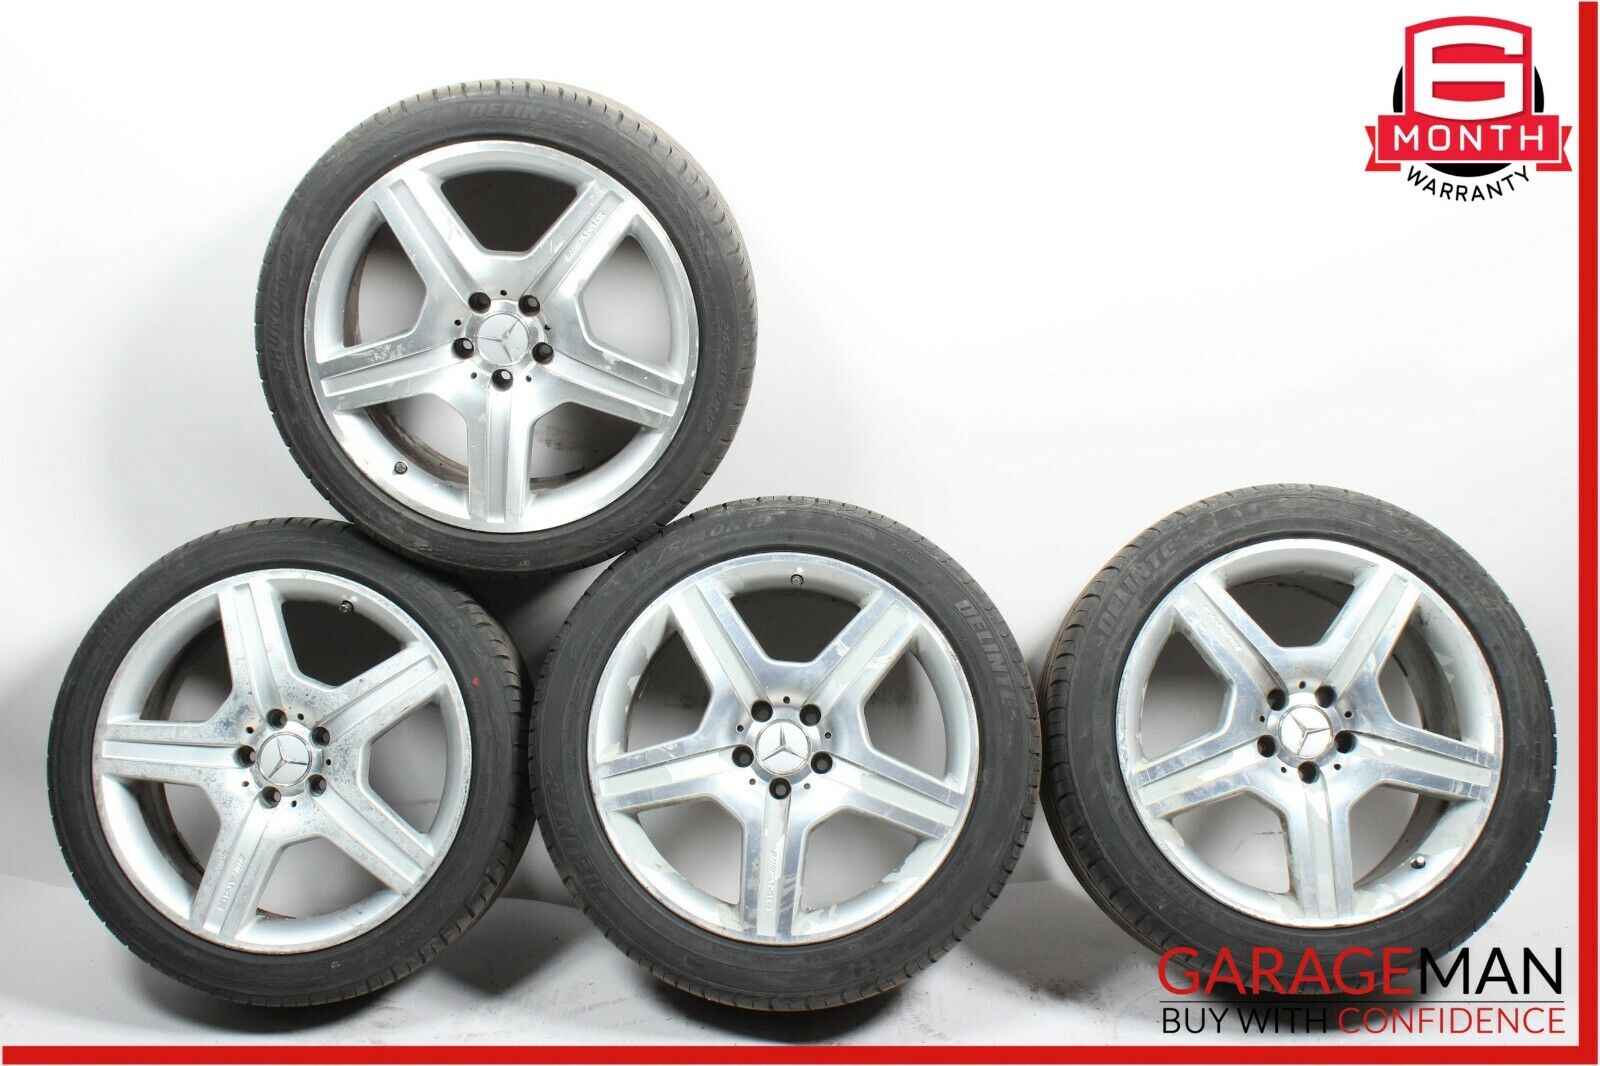 07-13 Mercedes S550 CL550 Staggered Wheel Rim Tires Set of 4 Pc 8.5x9.5 R19